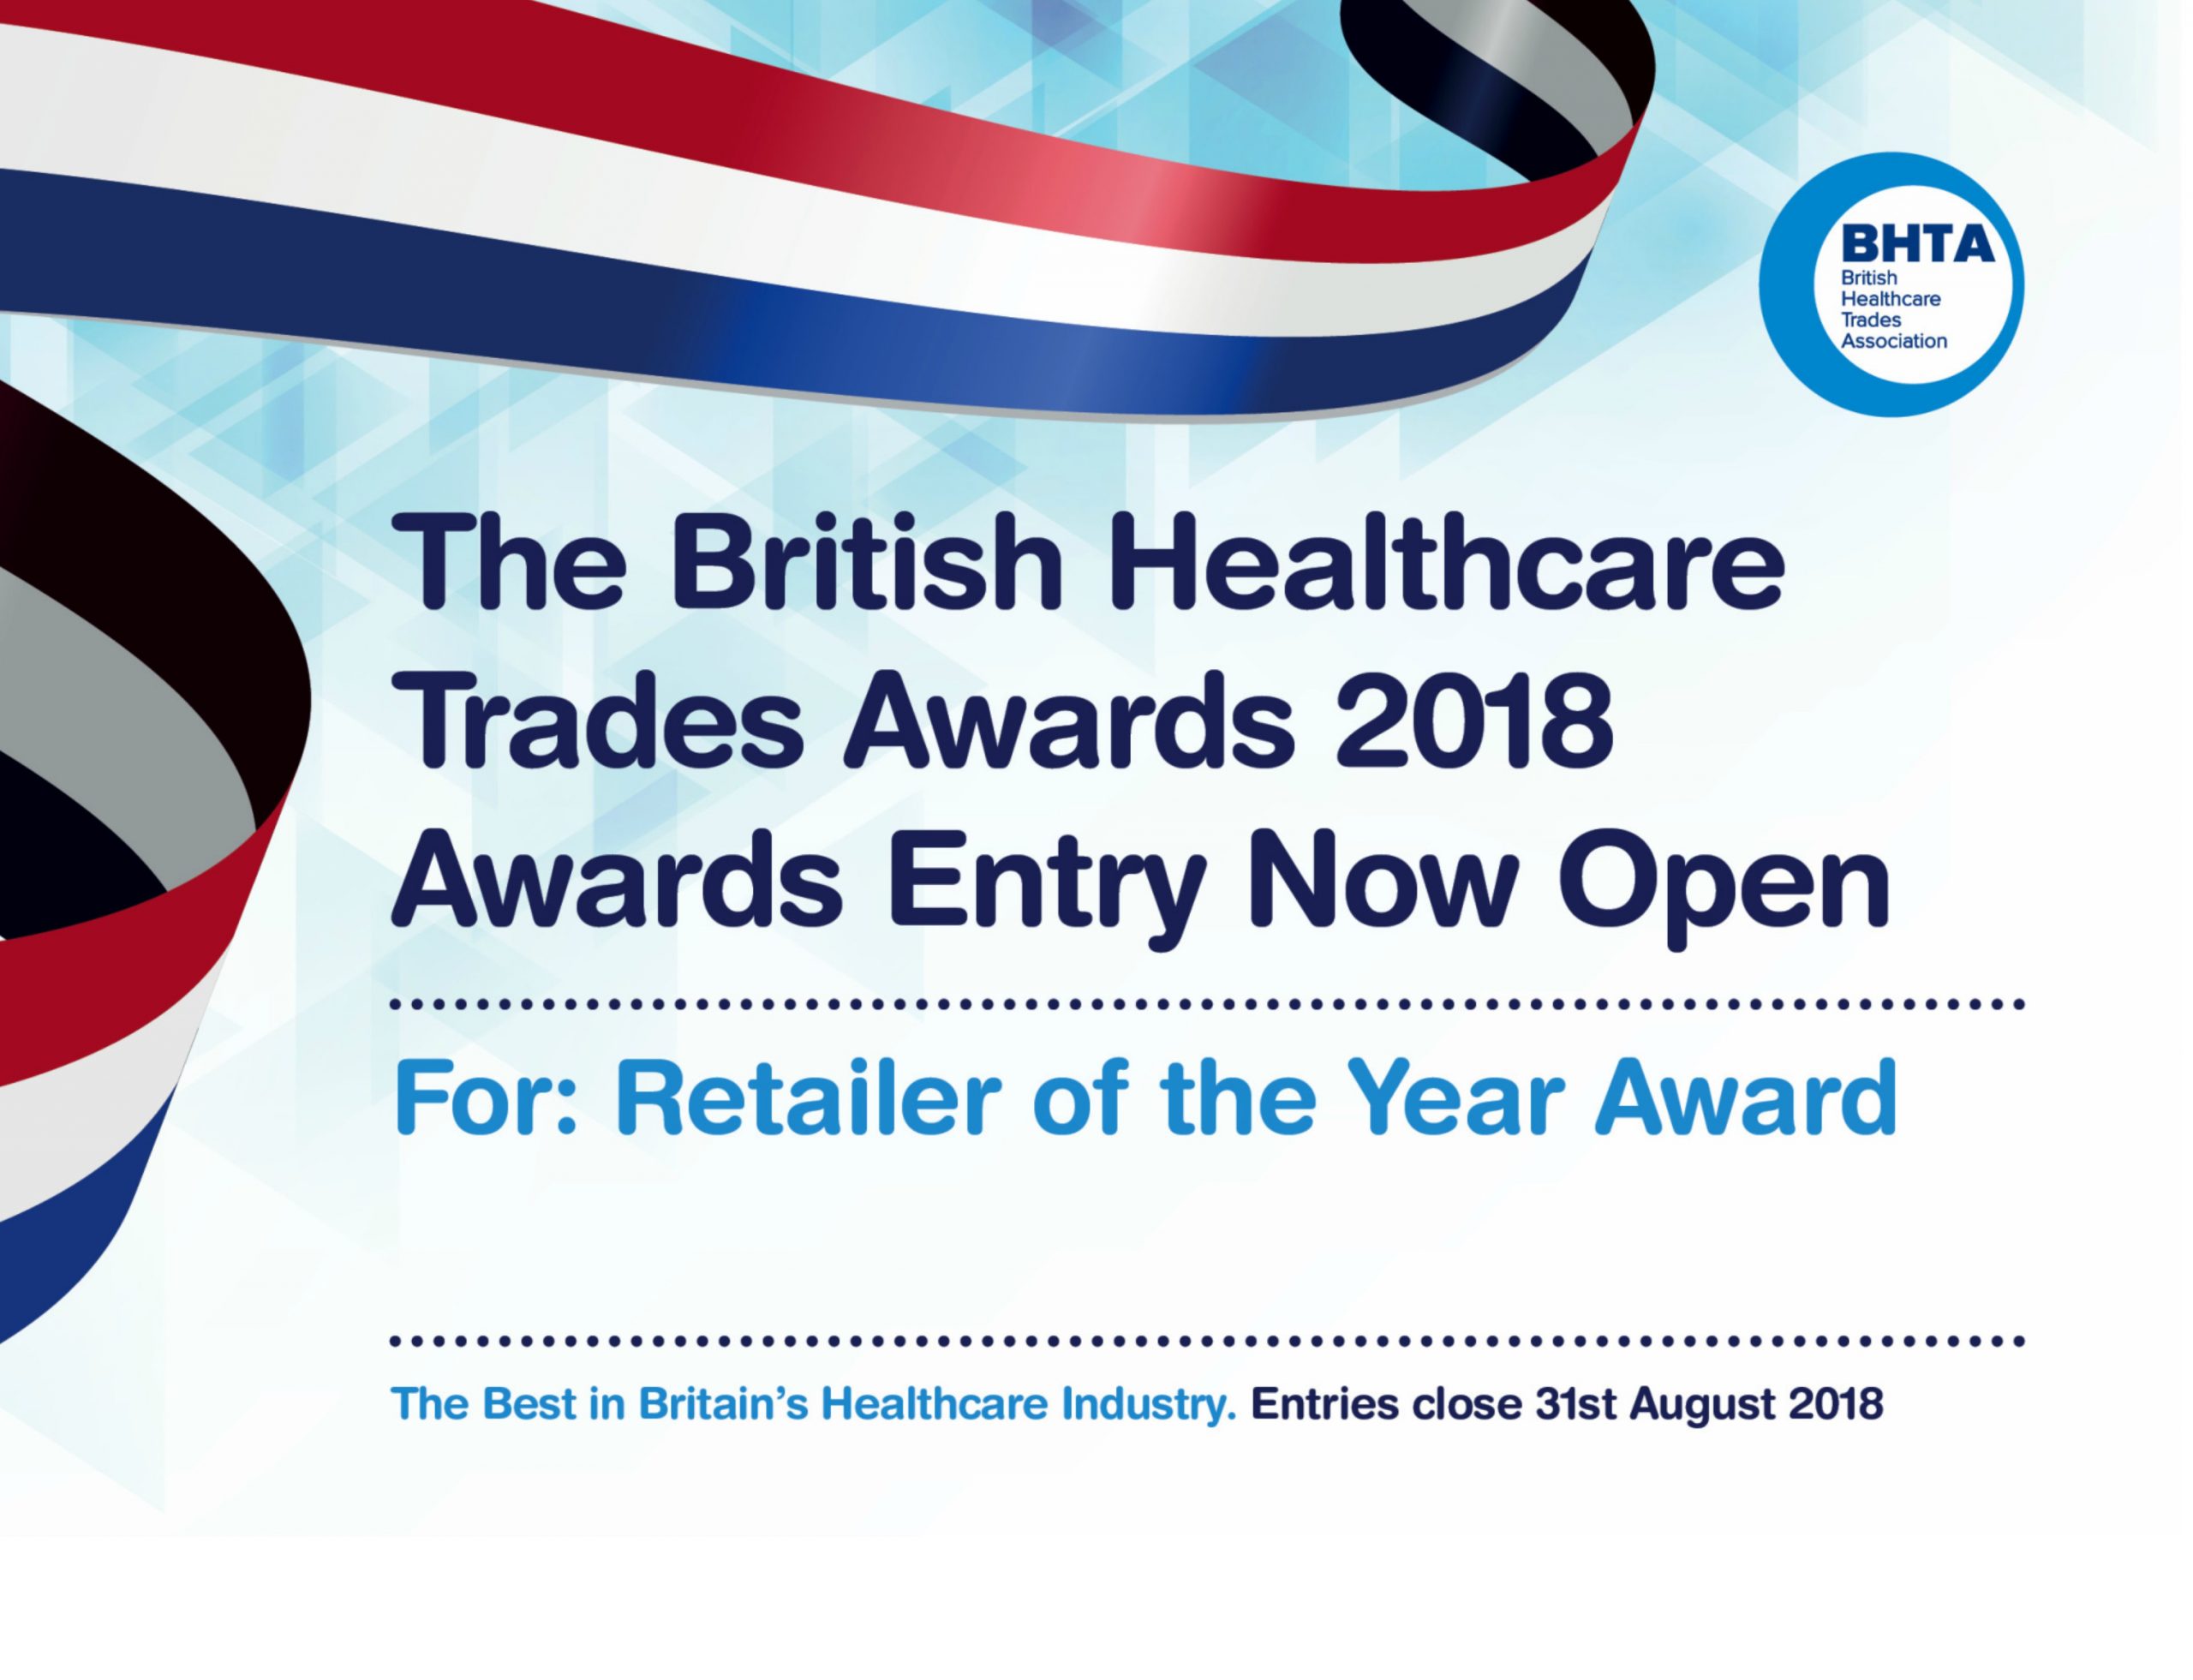 BHTA Retailer of the Year – Calling Healthcare Professionals to Nominate